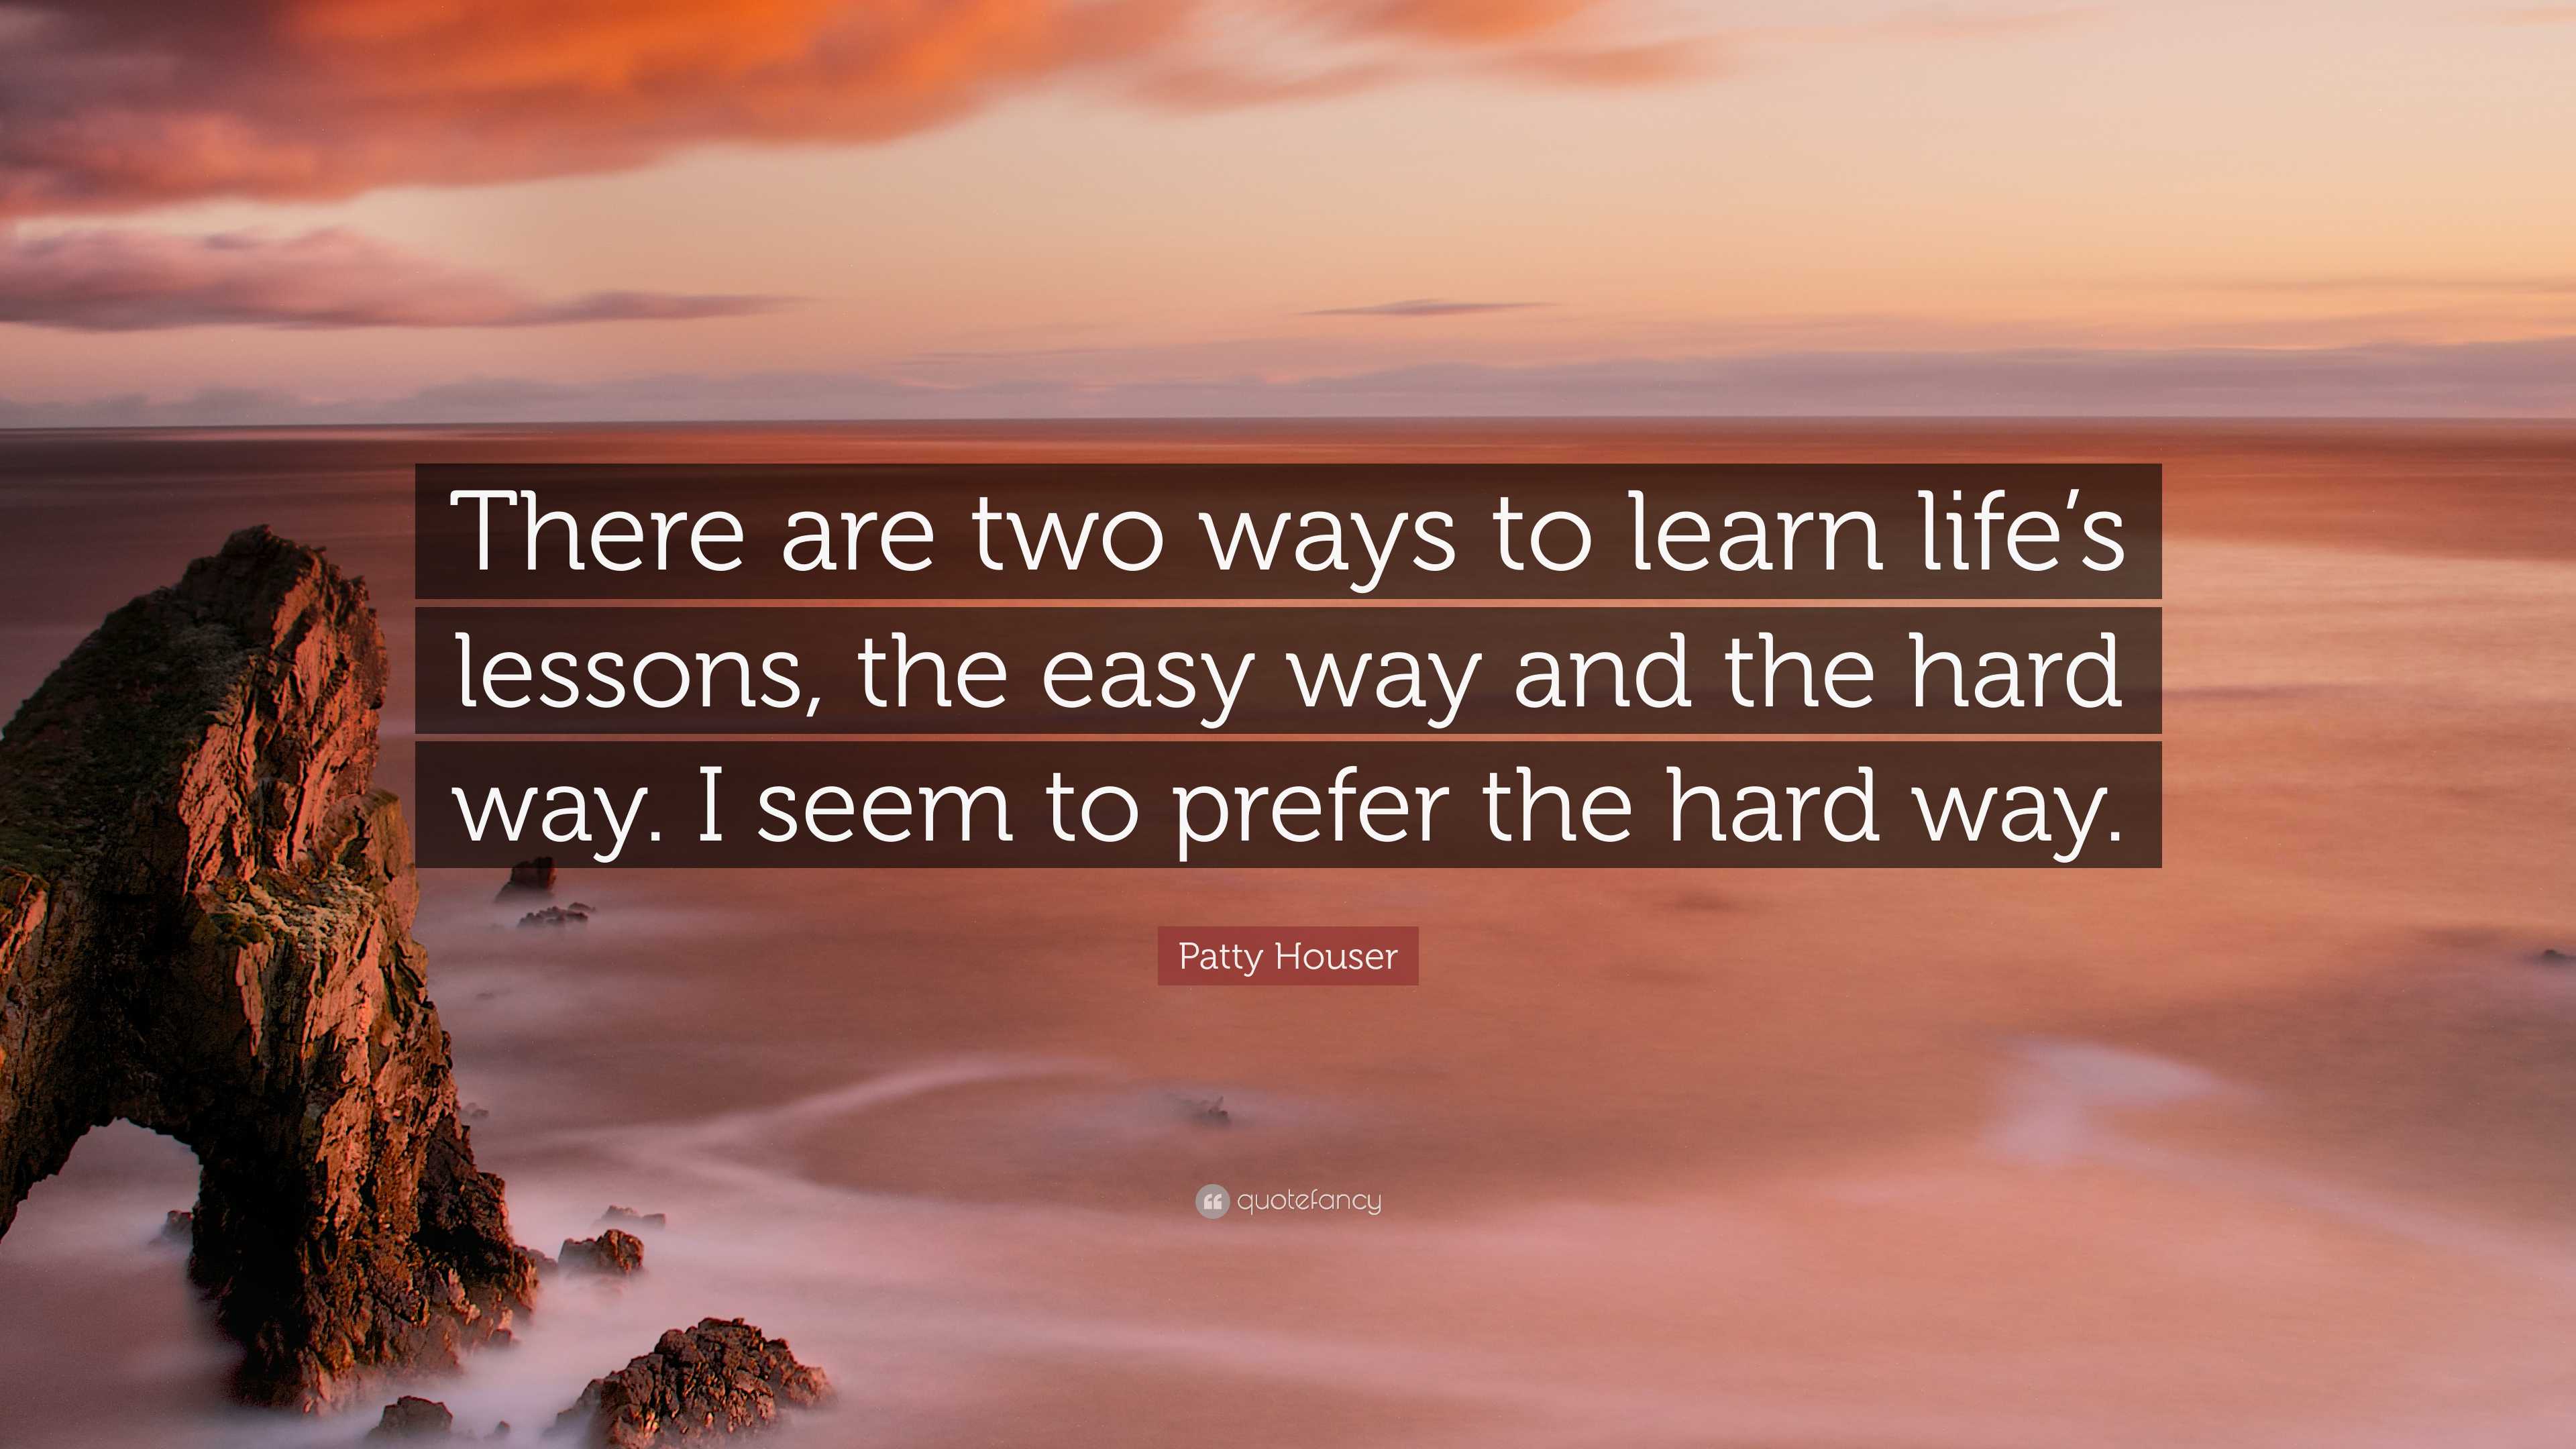 Learn the easy way or the hard way, it's better to learn the hard